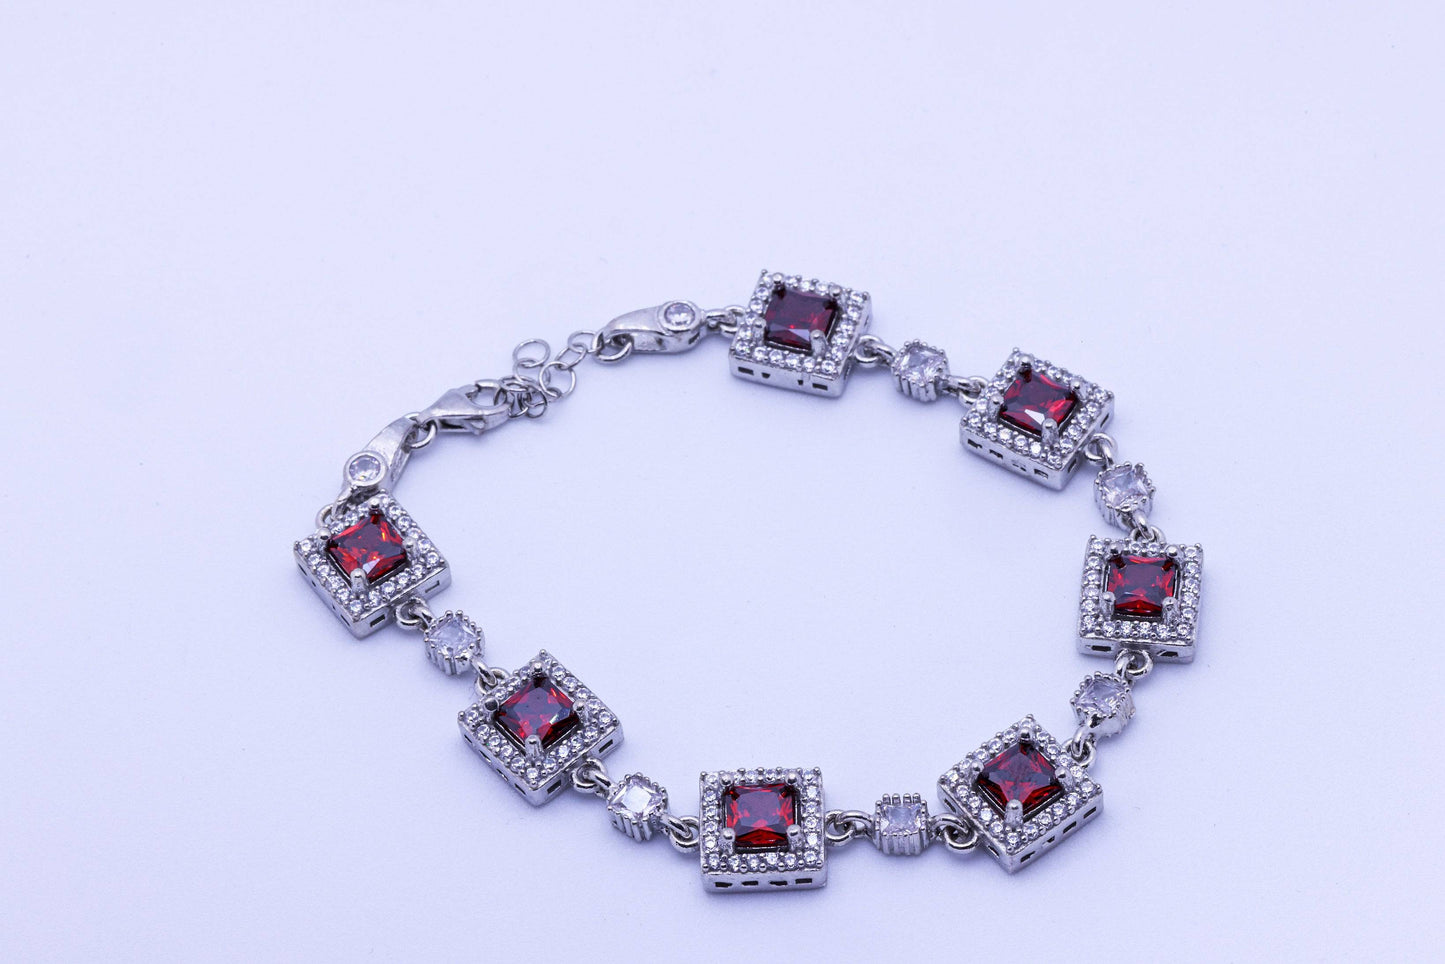 Exquisite Sterling Silver Fancy Stone Bracelet - Elegance and Glamour | 13.9g, 20cm